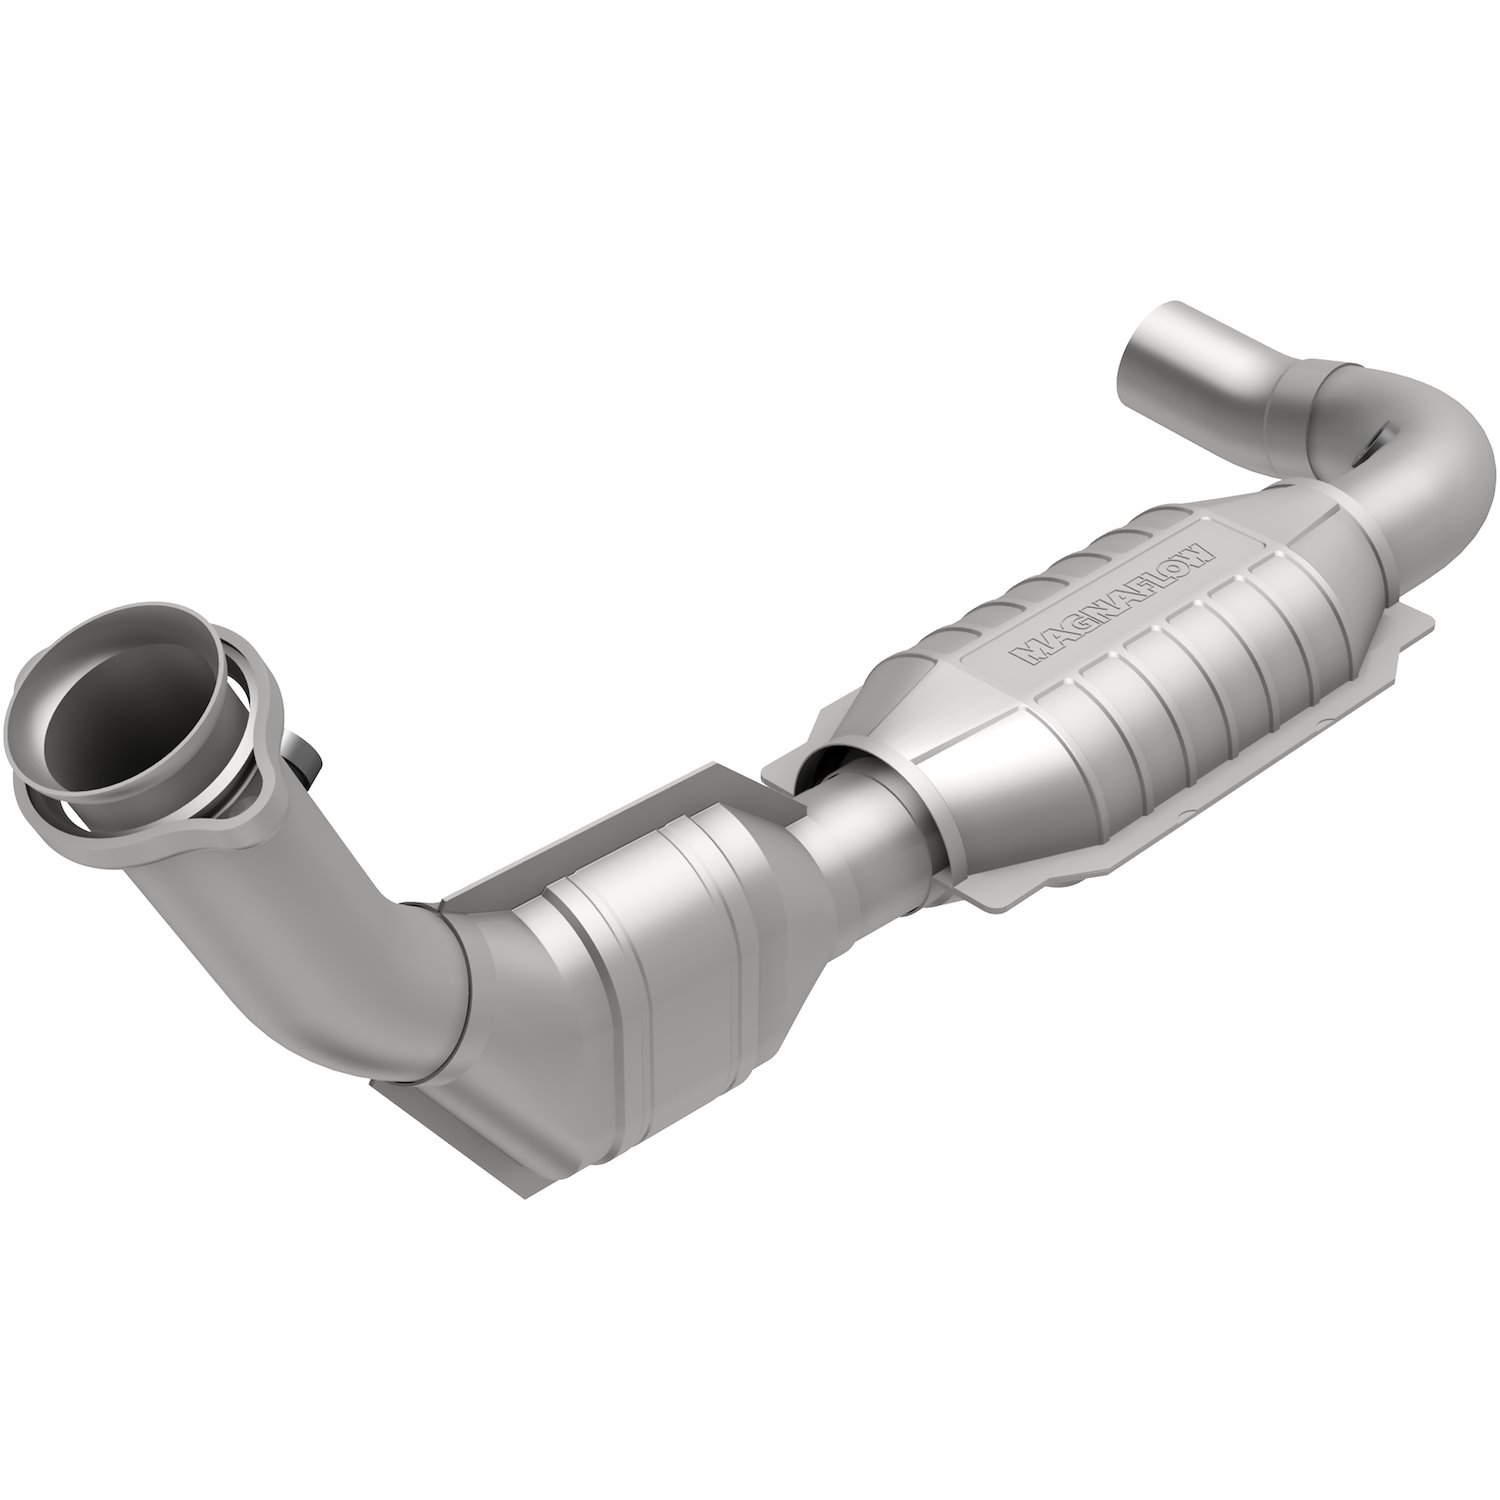 1997-1998 Ford Expedition HM Grade Federal / EPA Compliant Direct-Fit Catalytic Converter